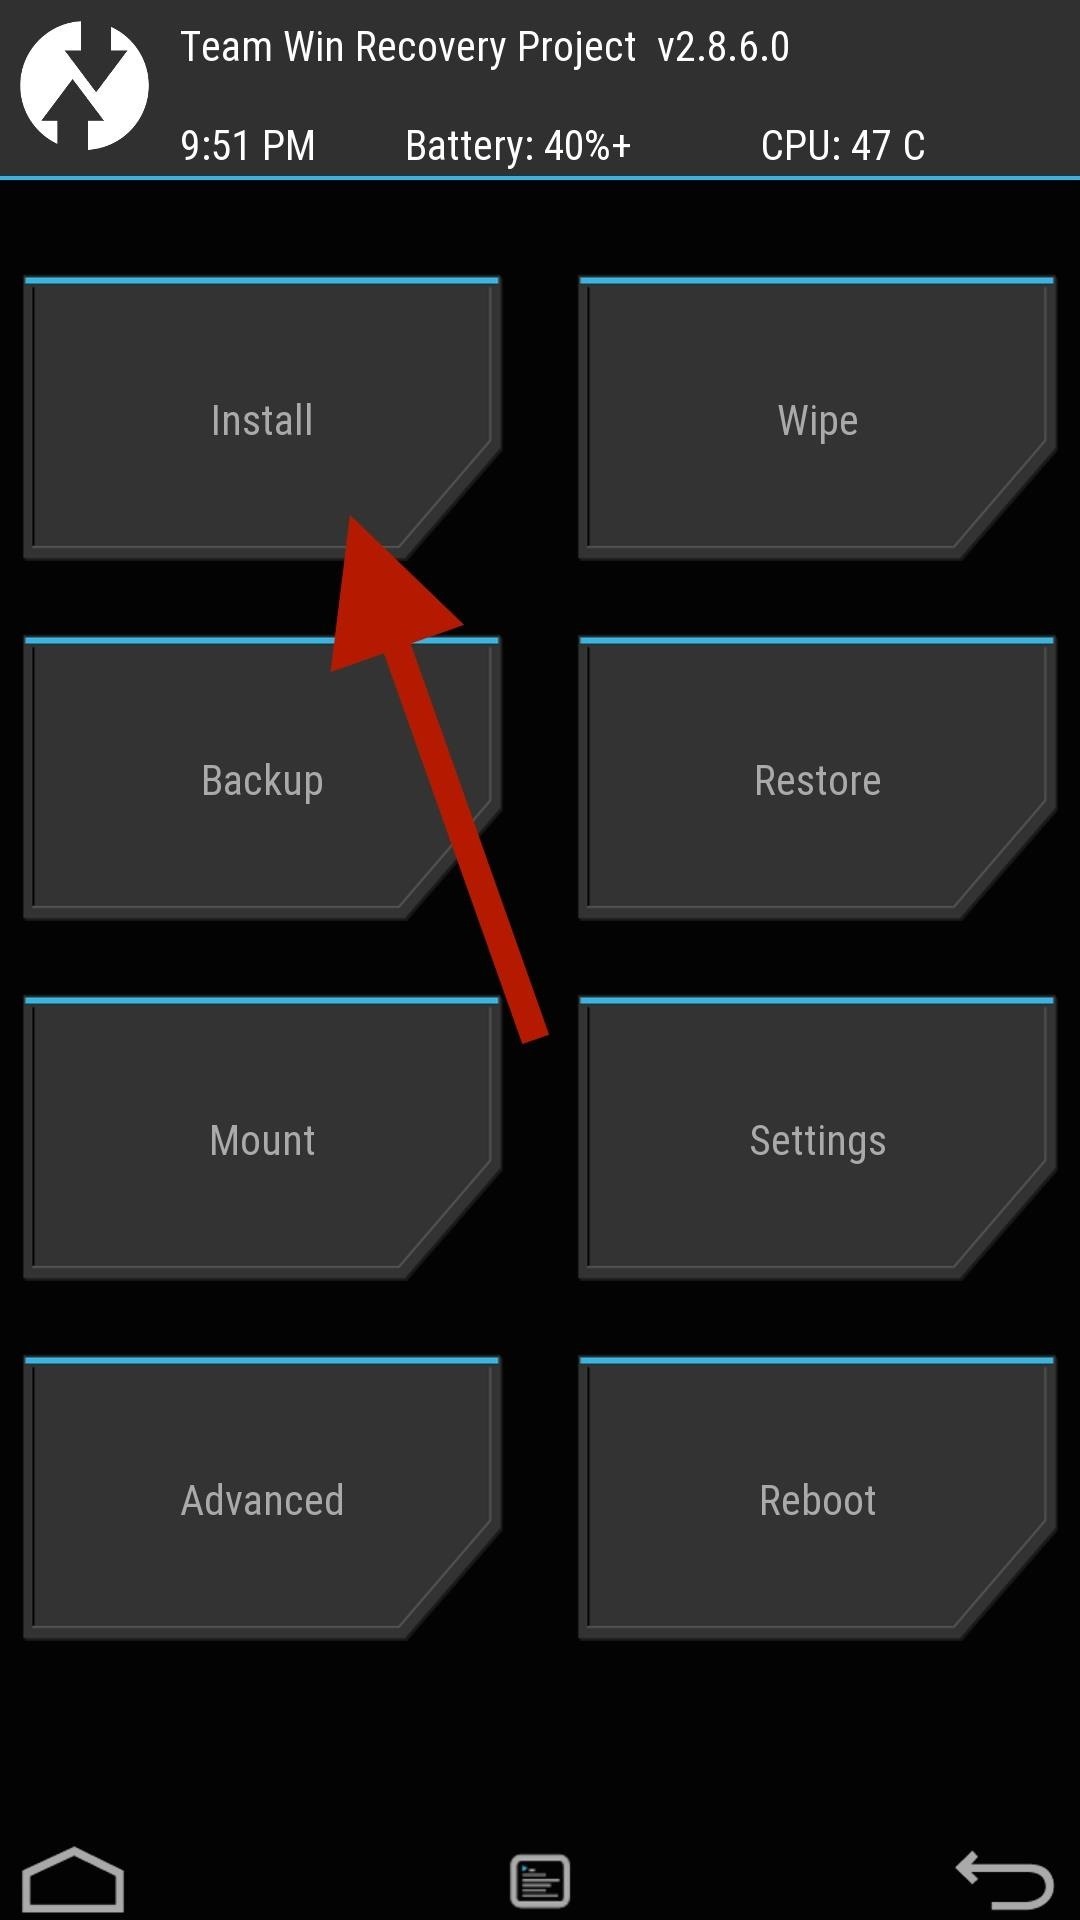 How to Get Dolby Atmos Surround Sound on Any Android